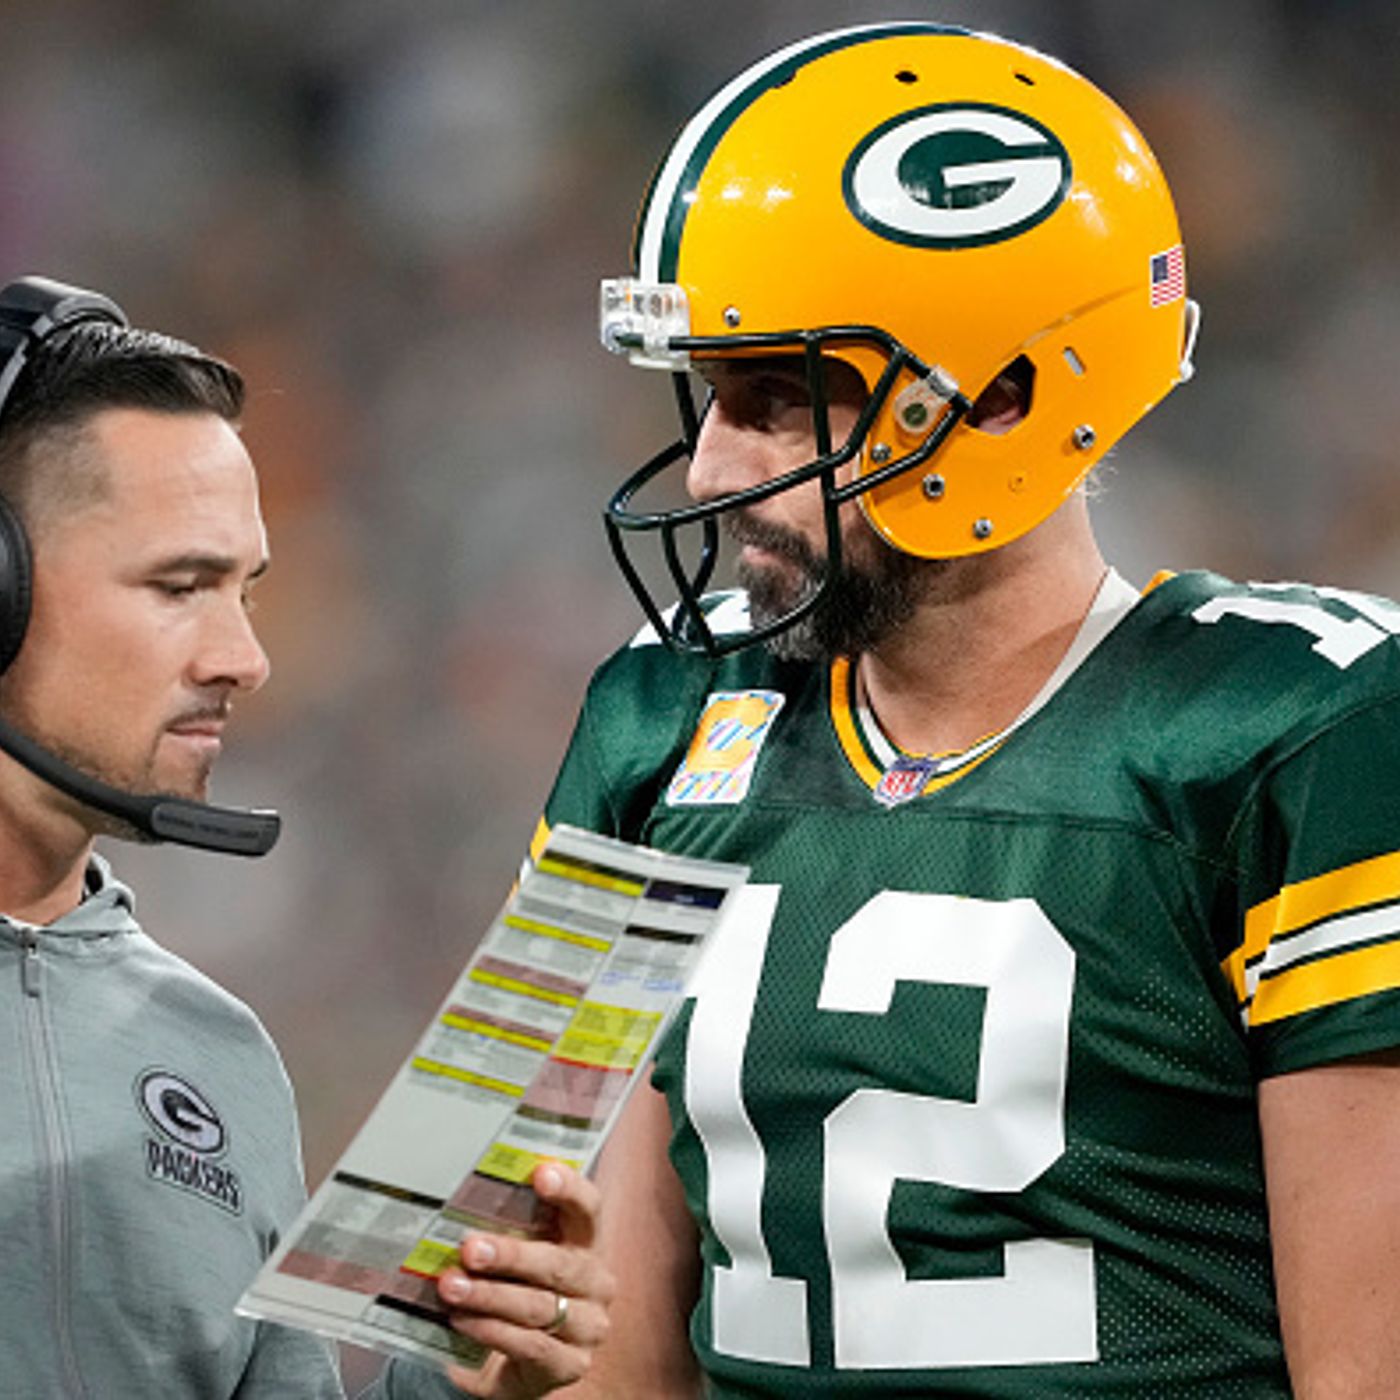 Bonus: What’s wrong with the Packers offense